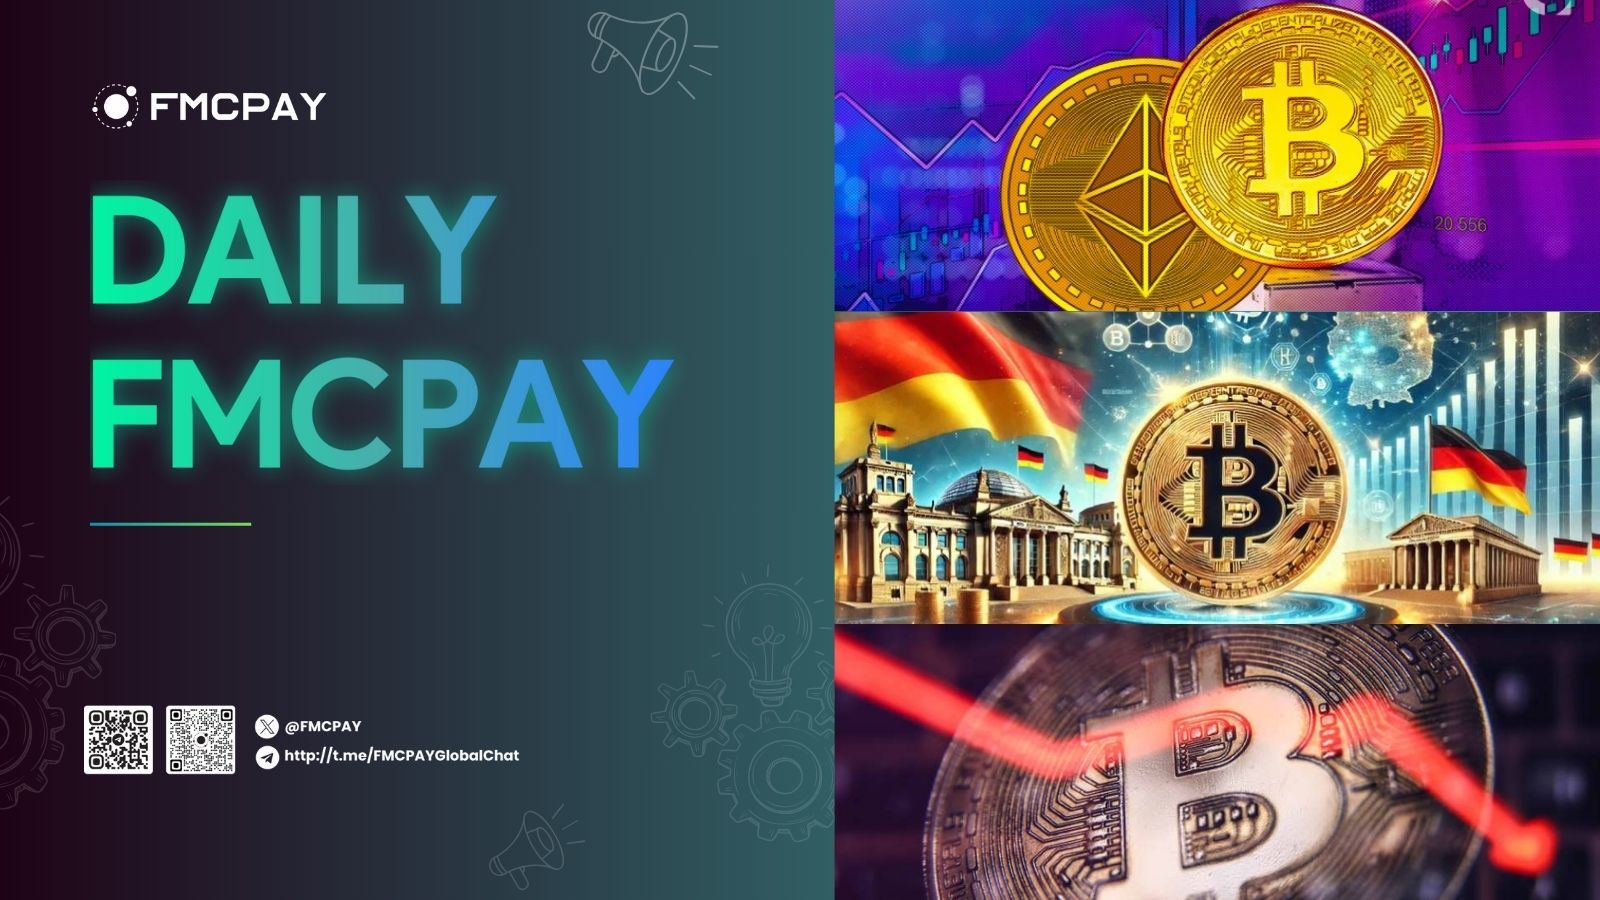 fmcpay over 18000 bitcoin options to expire real panic selloff isnt even here yet